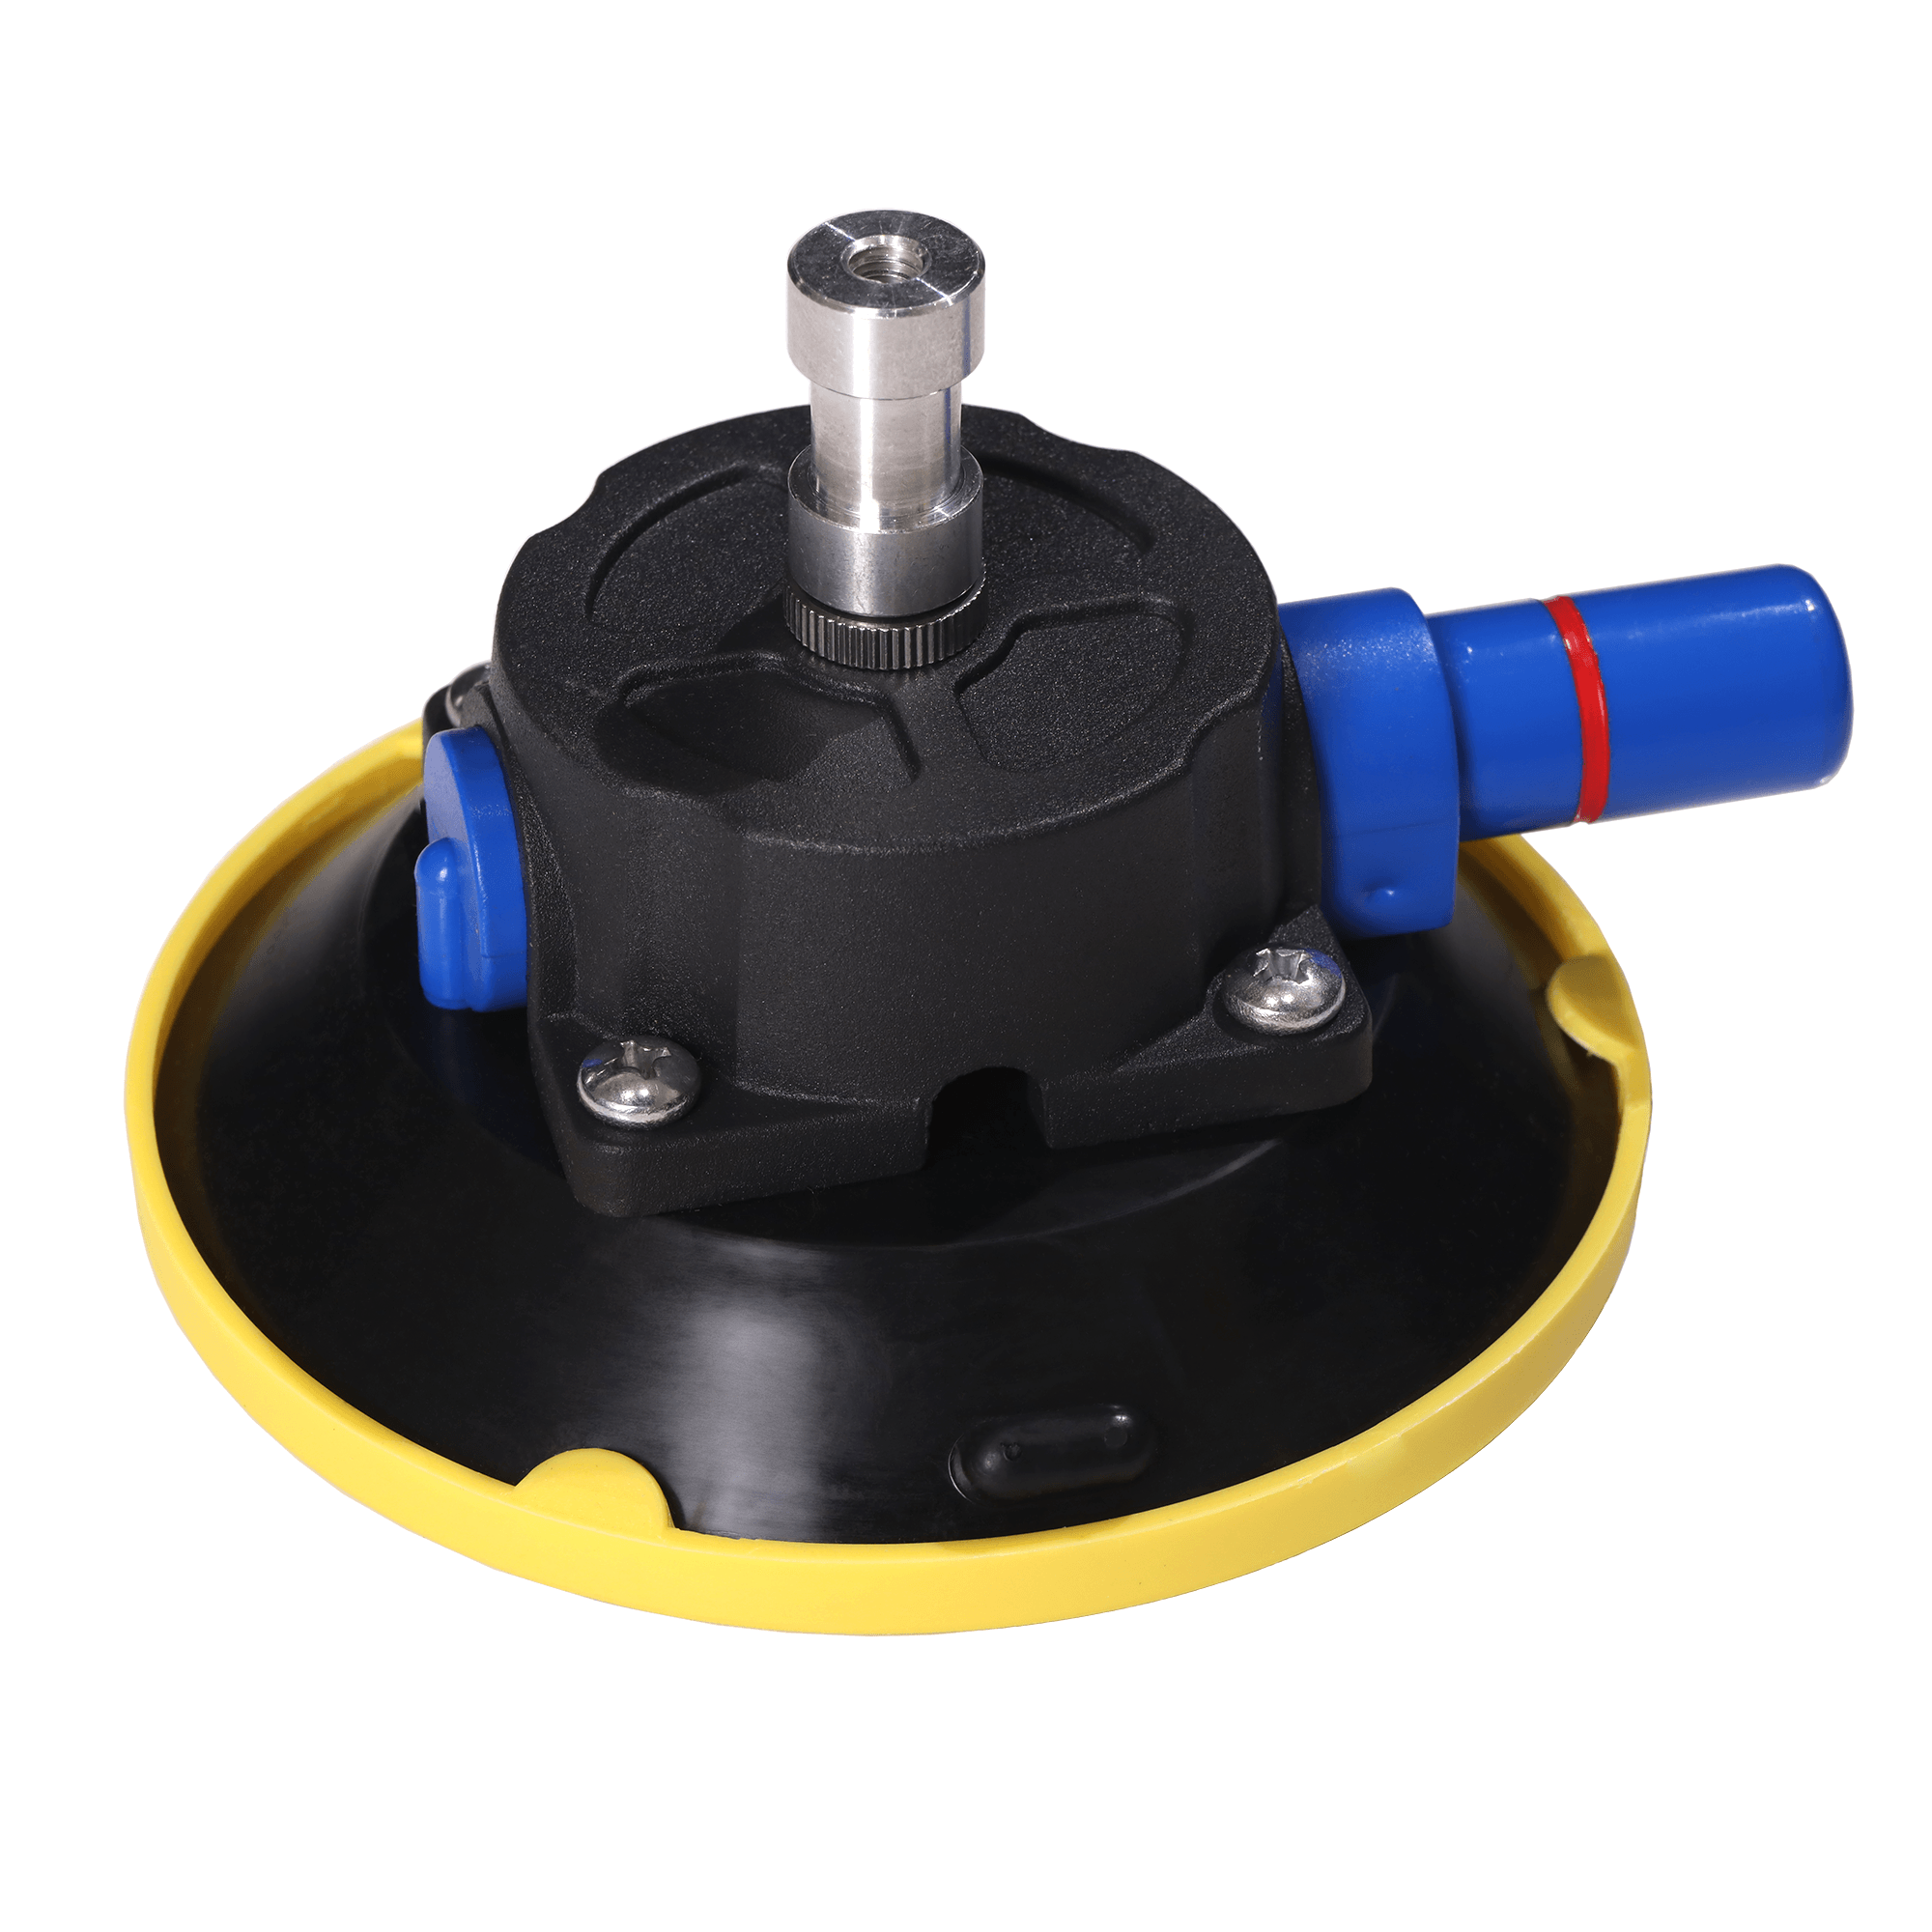 Single Suction Cup, Pump Active Camera Mounting Base for Cars & Vehicles